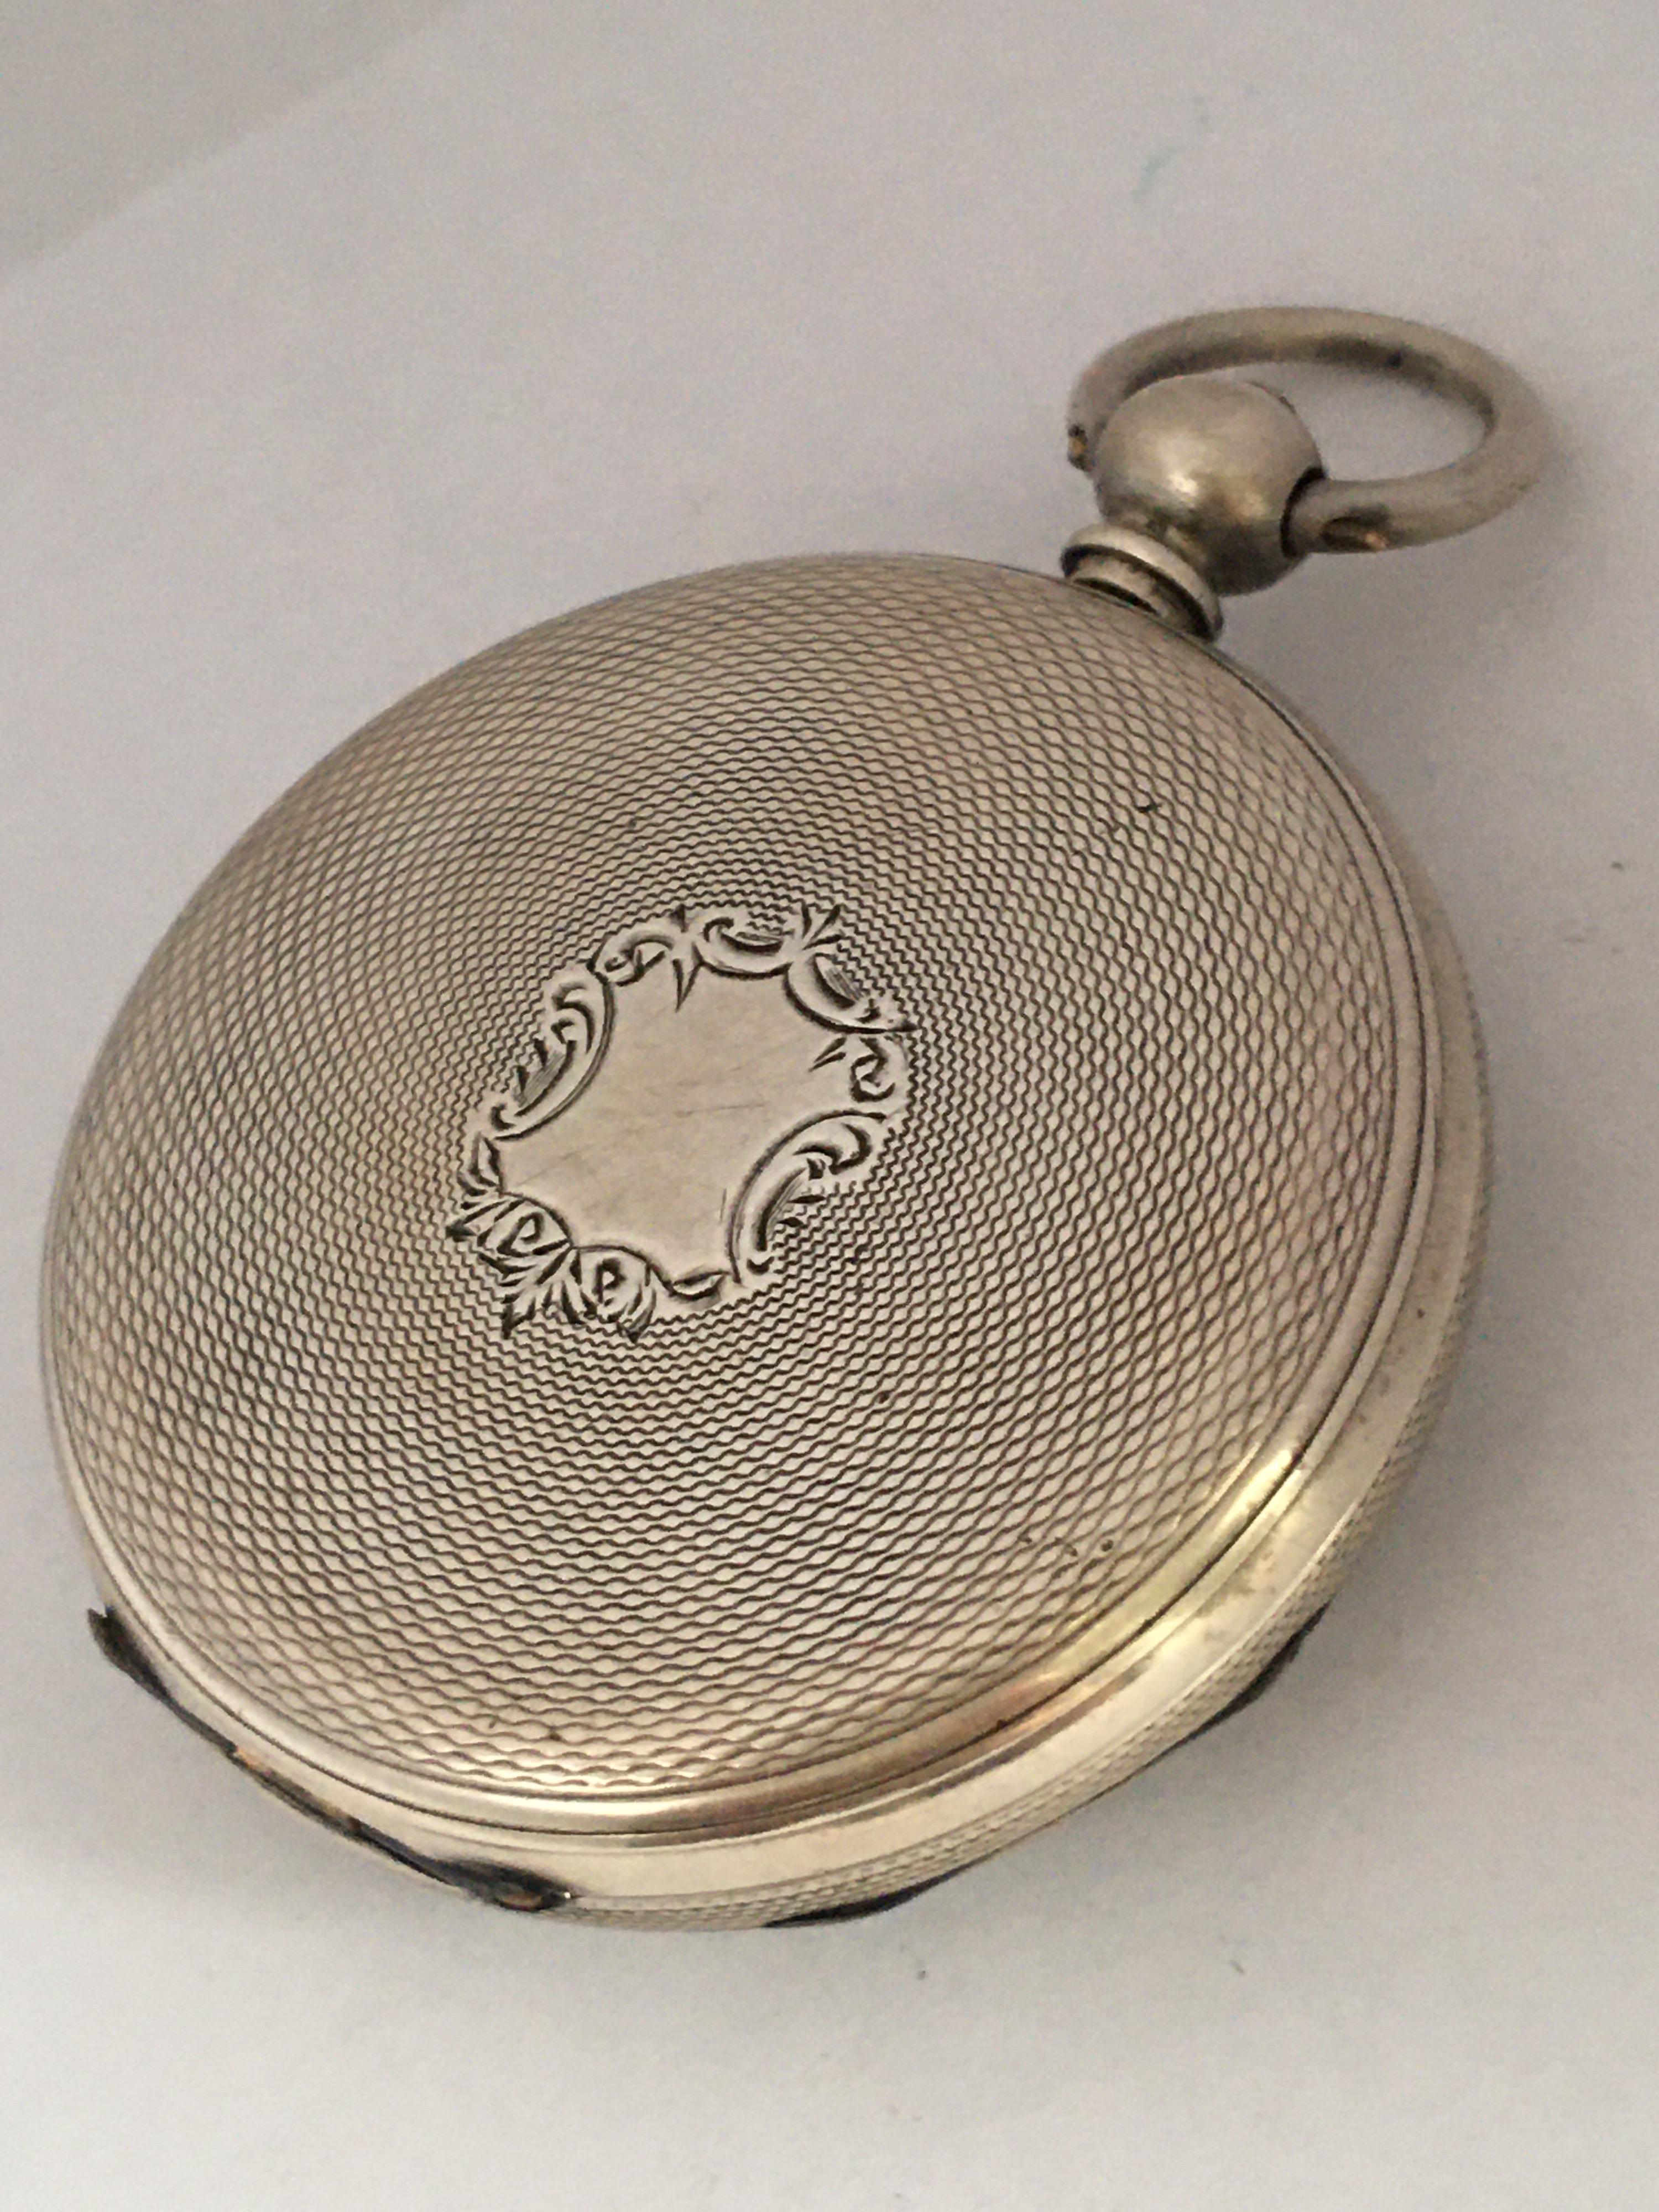 This beautiful 46mm diameter silver key-wind pocket watch is in good working condition and it is ticking and running well. Visible signs of ageing and wear with light tiny surface marks on the silver case and a bit of tarnished on  the hinges as